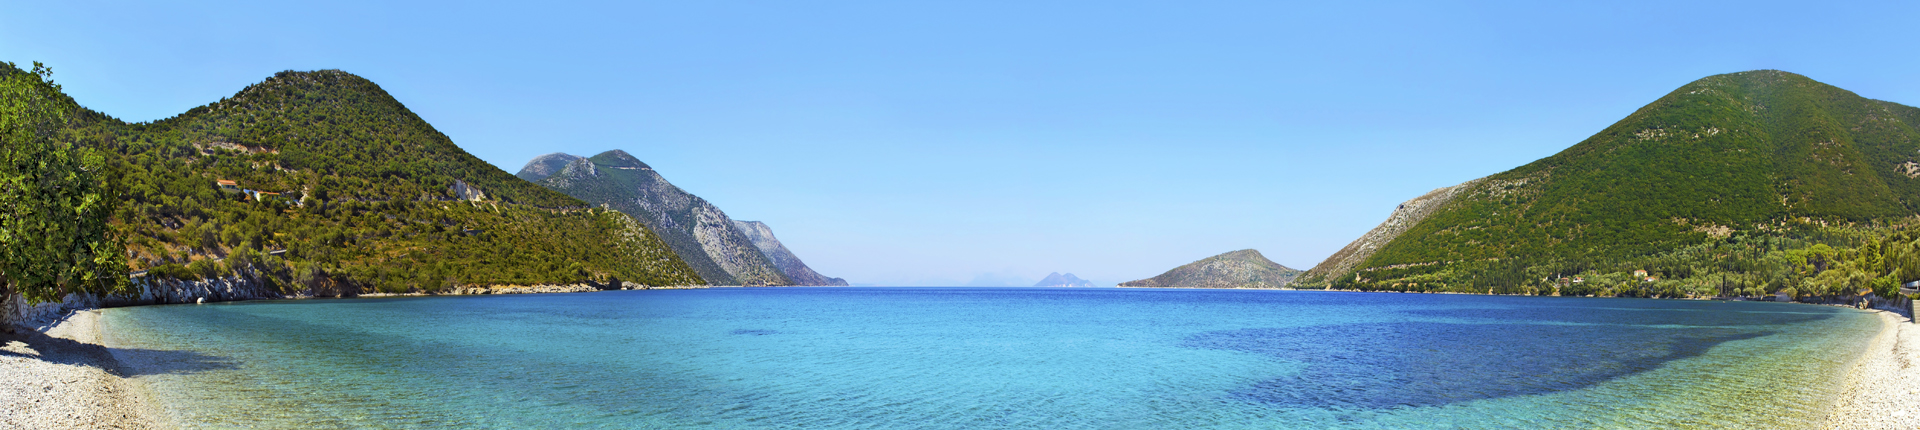 panoramic photo of a beach in Ithaca Greece